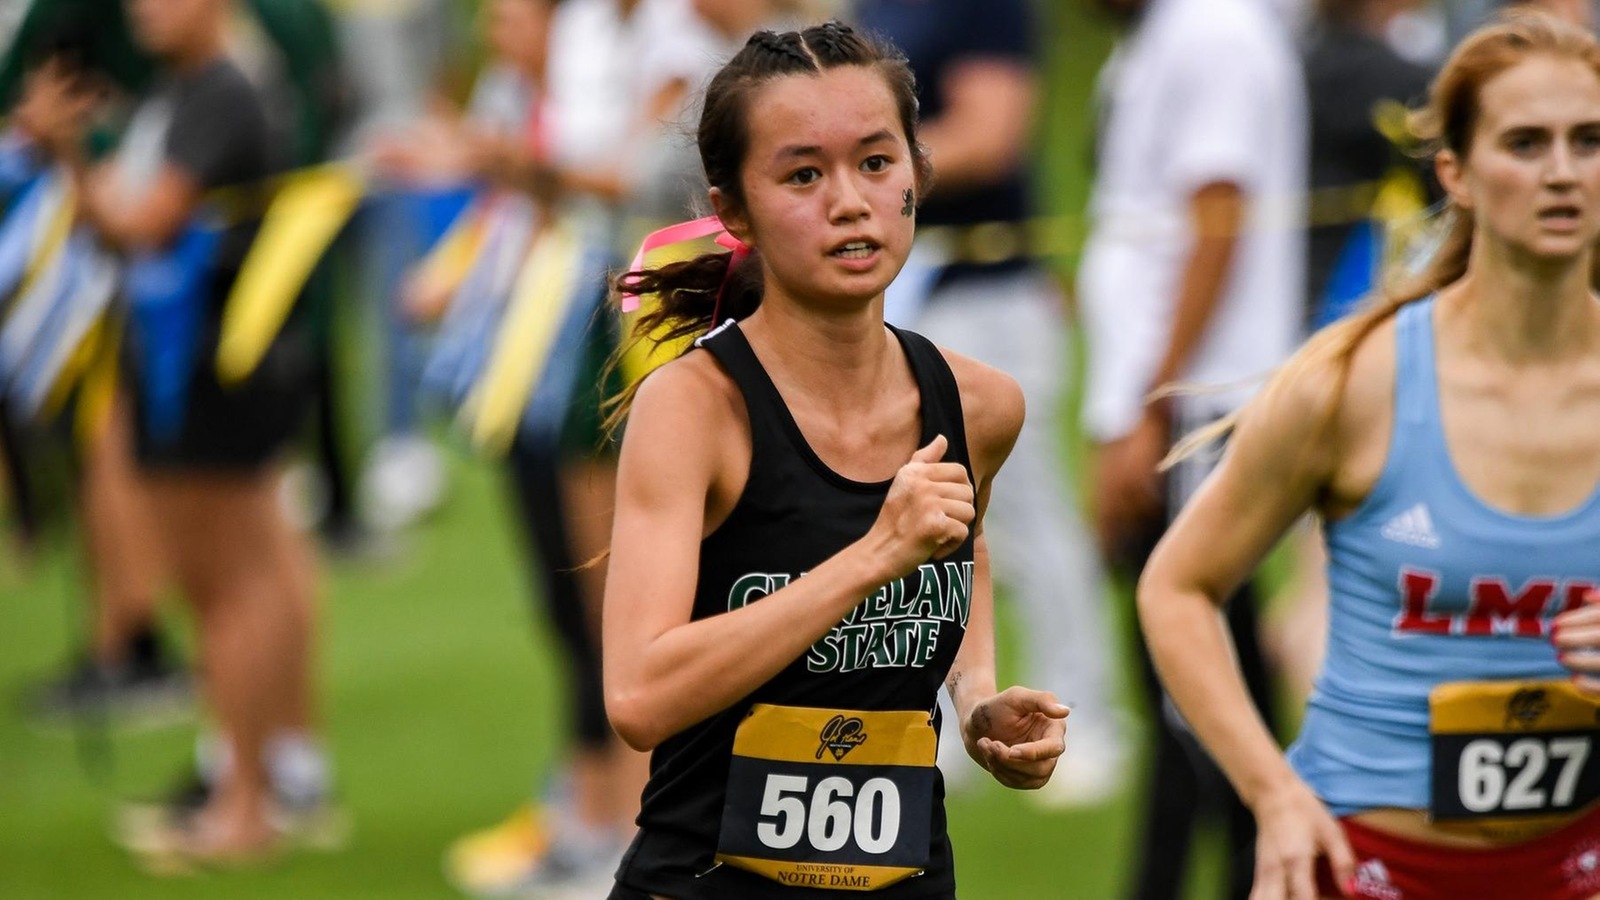 Cleveland State Cross Country Records Multiple Personal-Best Times At Falcon Invite